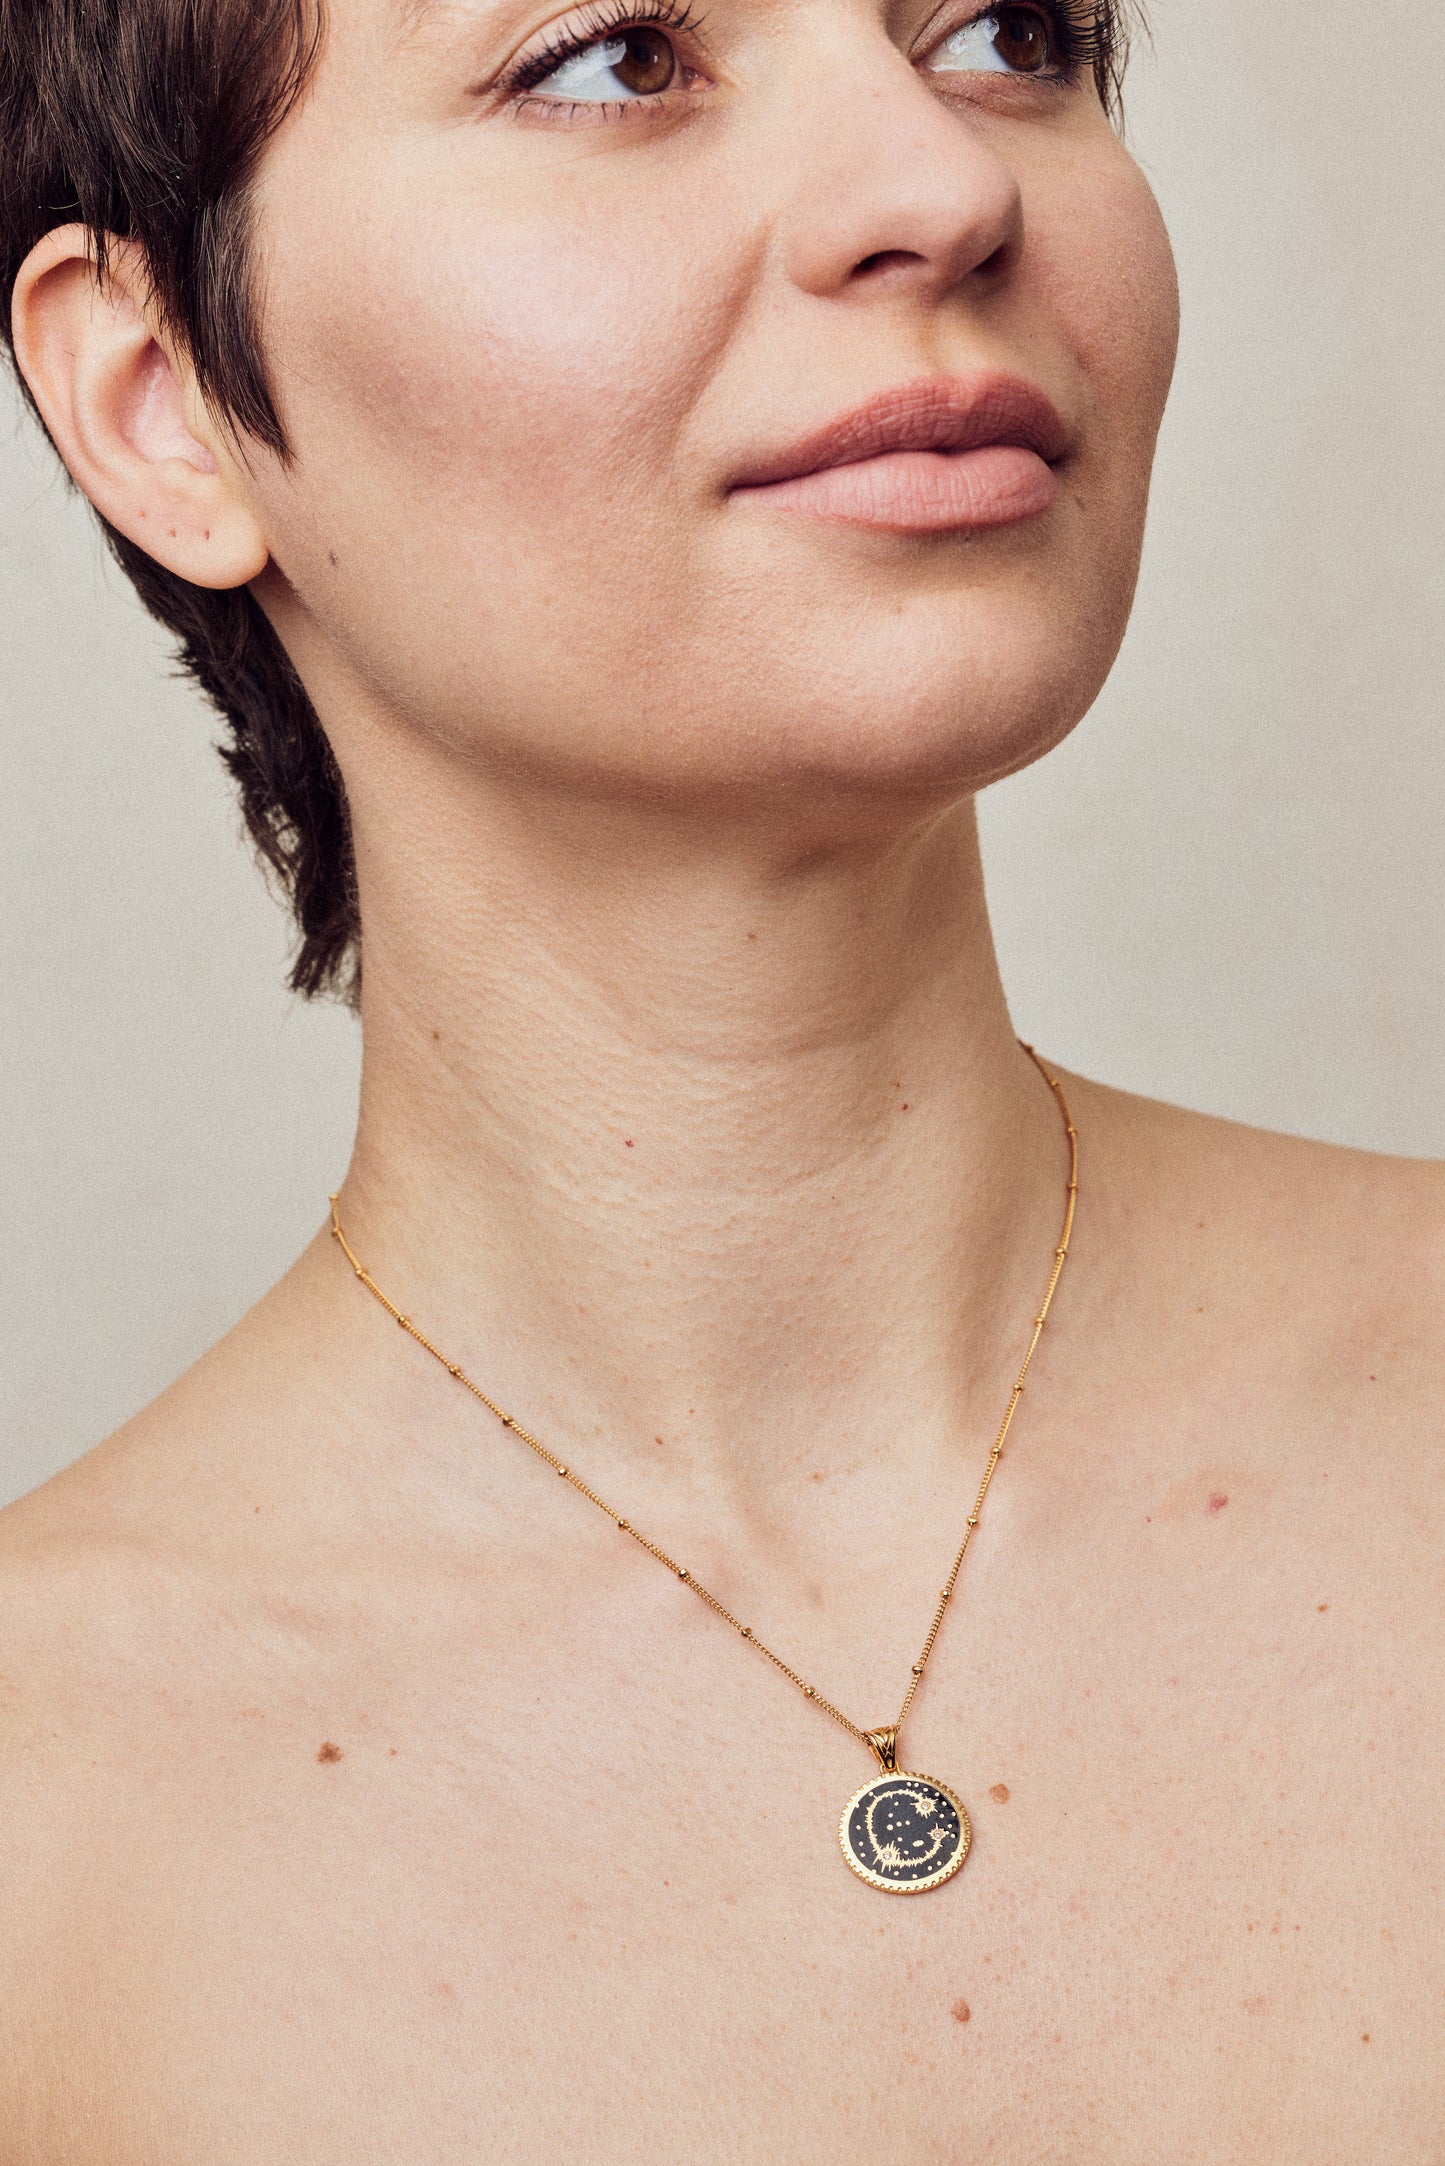 image of diamond initial necklace on short chain shown on bare chest of woman with short brown hair